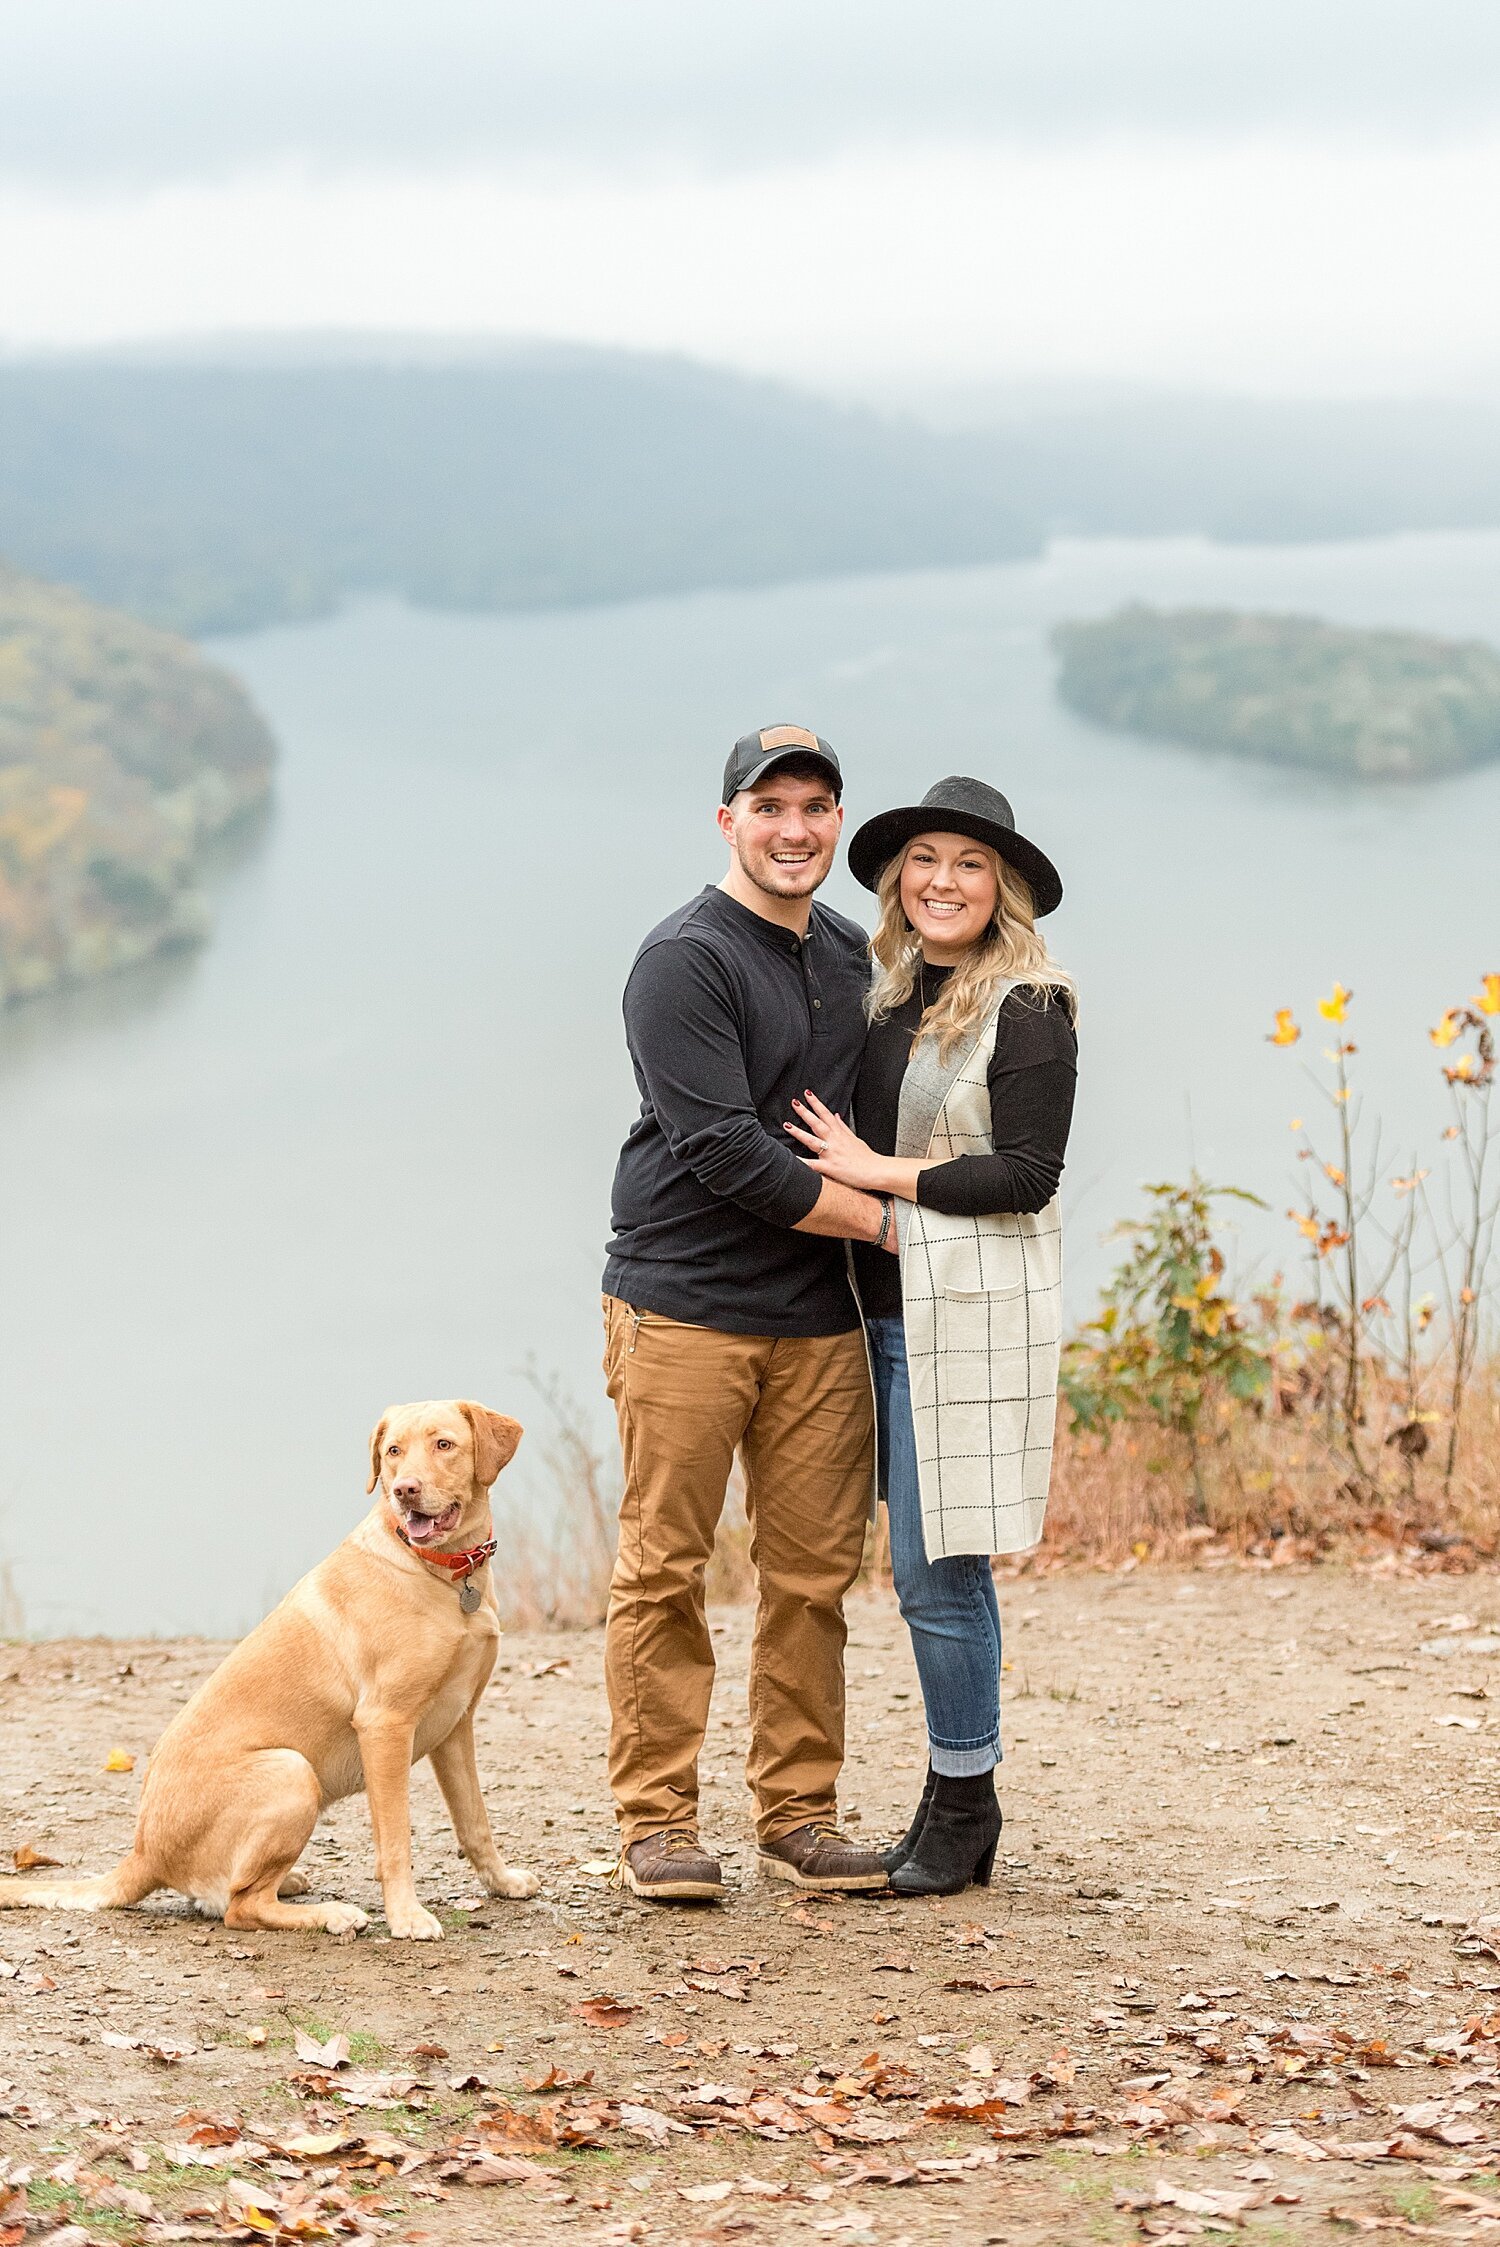 Pinnacle Overlook Holtwood PA Surprise Proposal Photography_8738.jpg